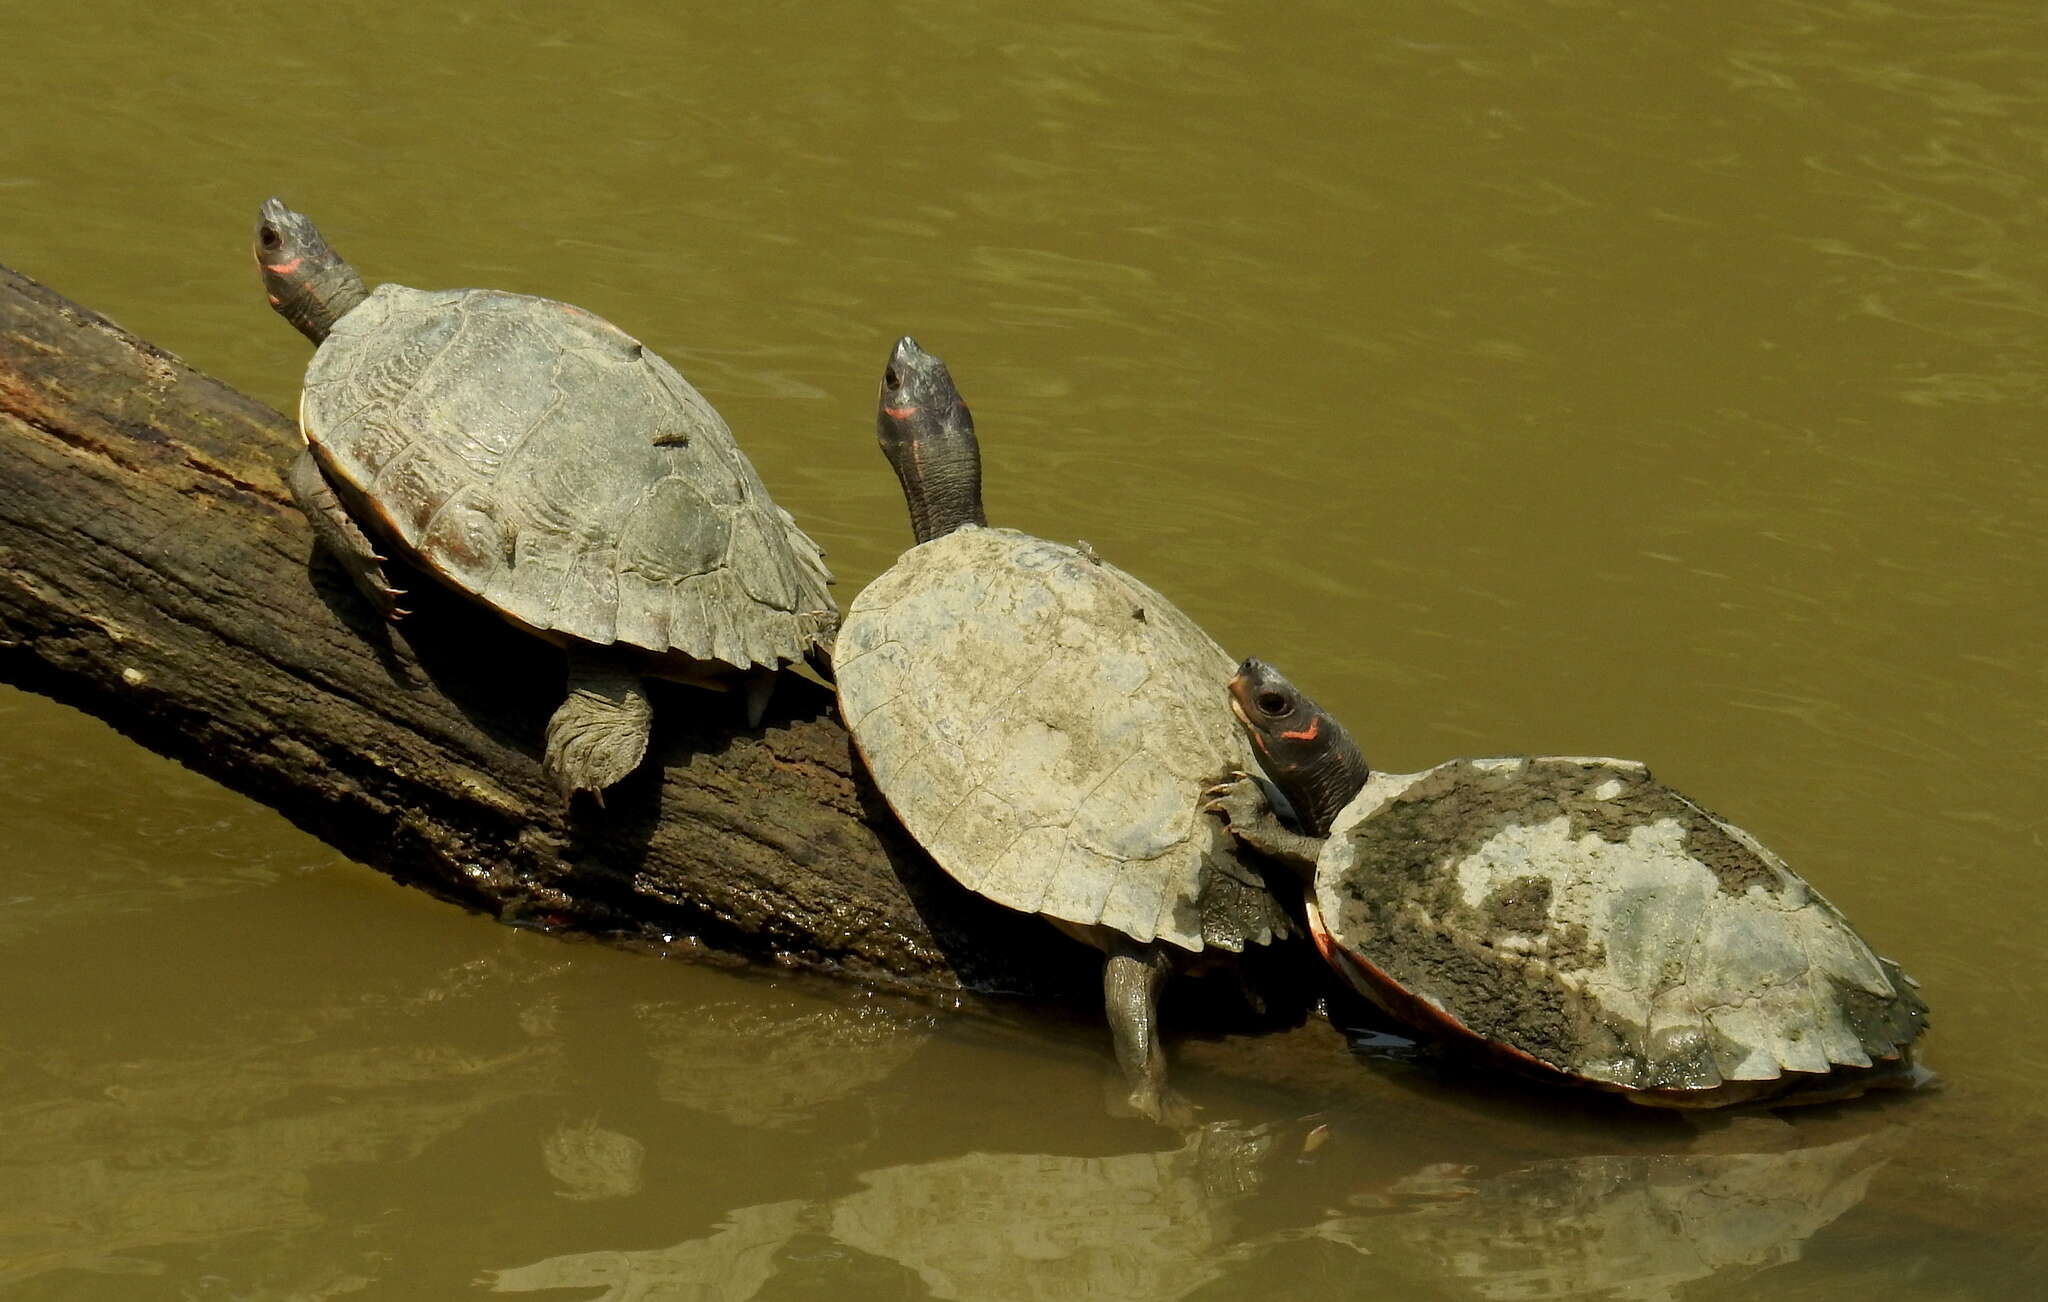 Image of Assam Roofed Turtle